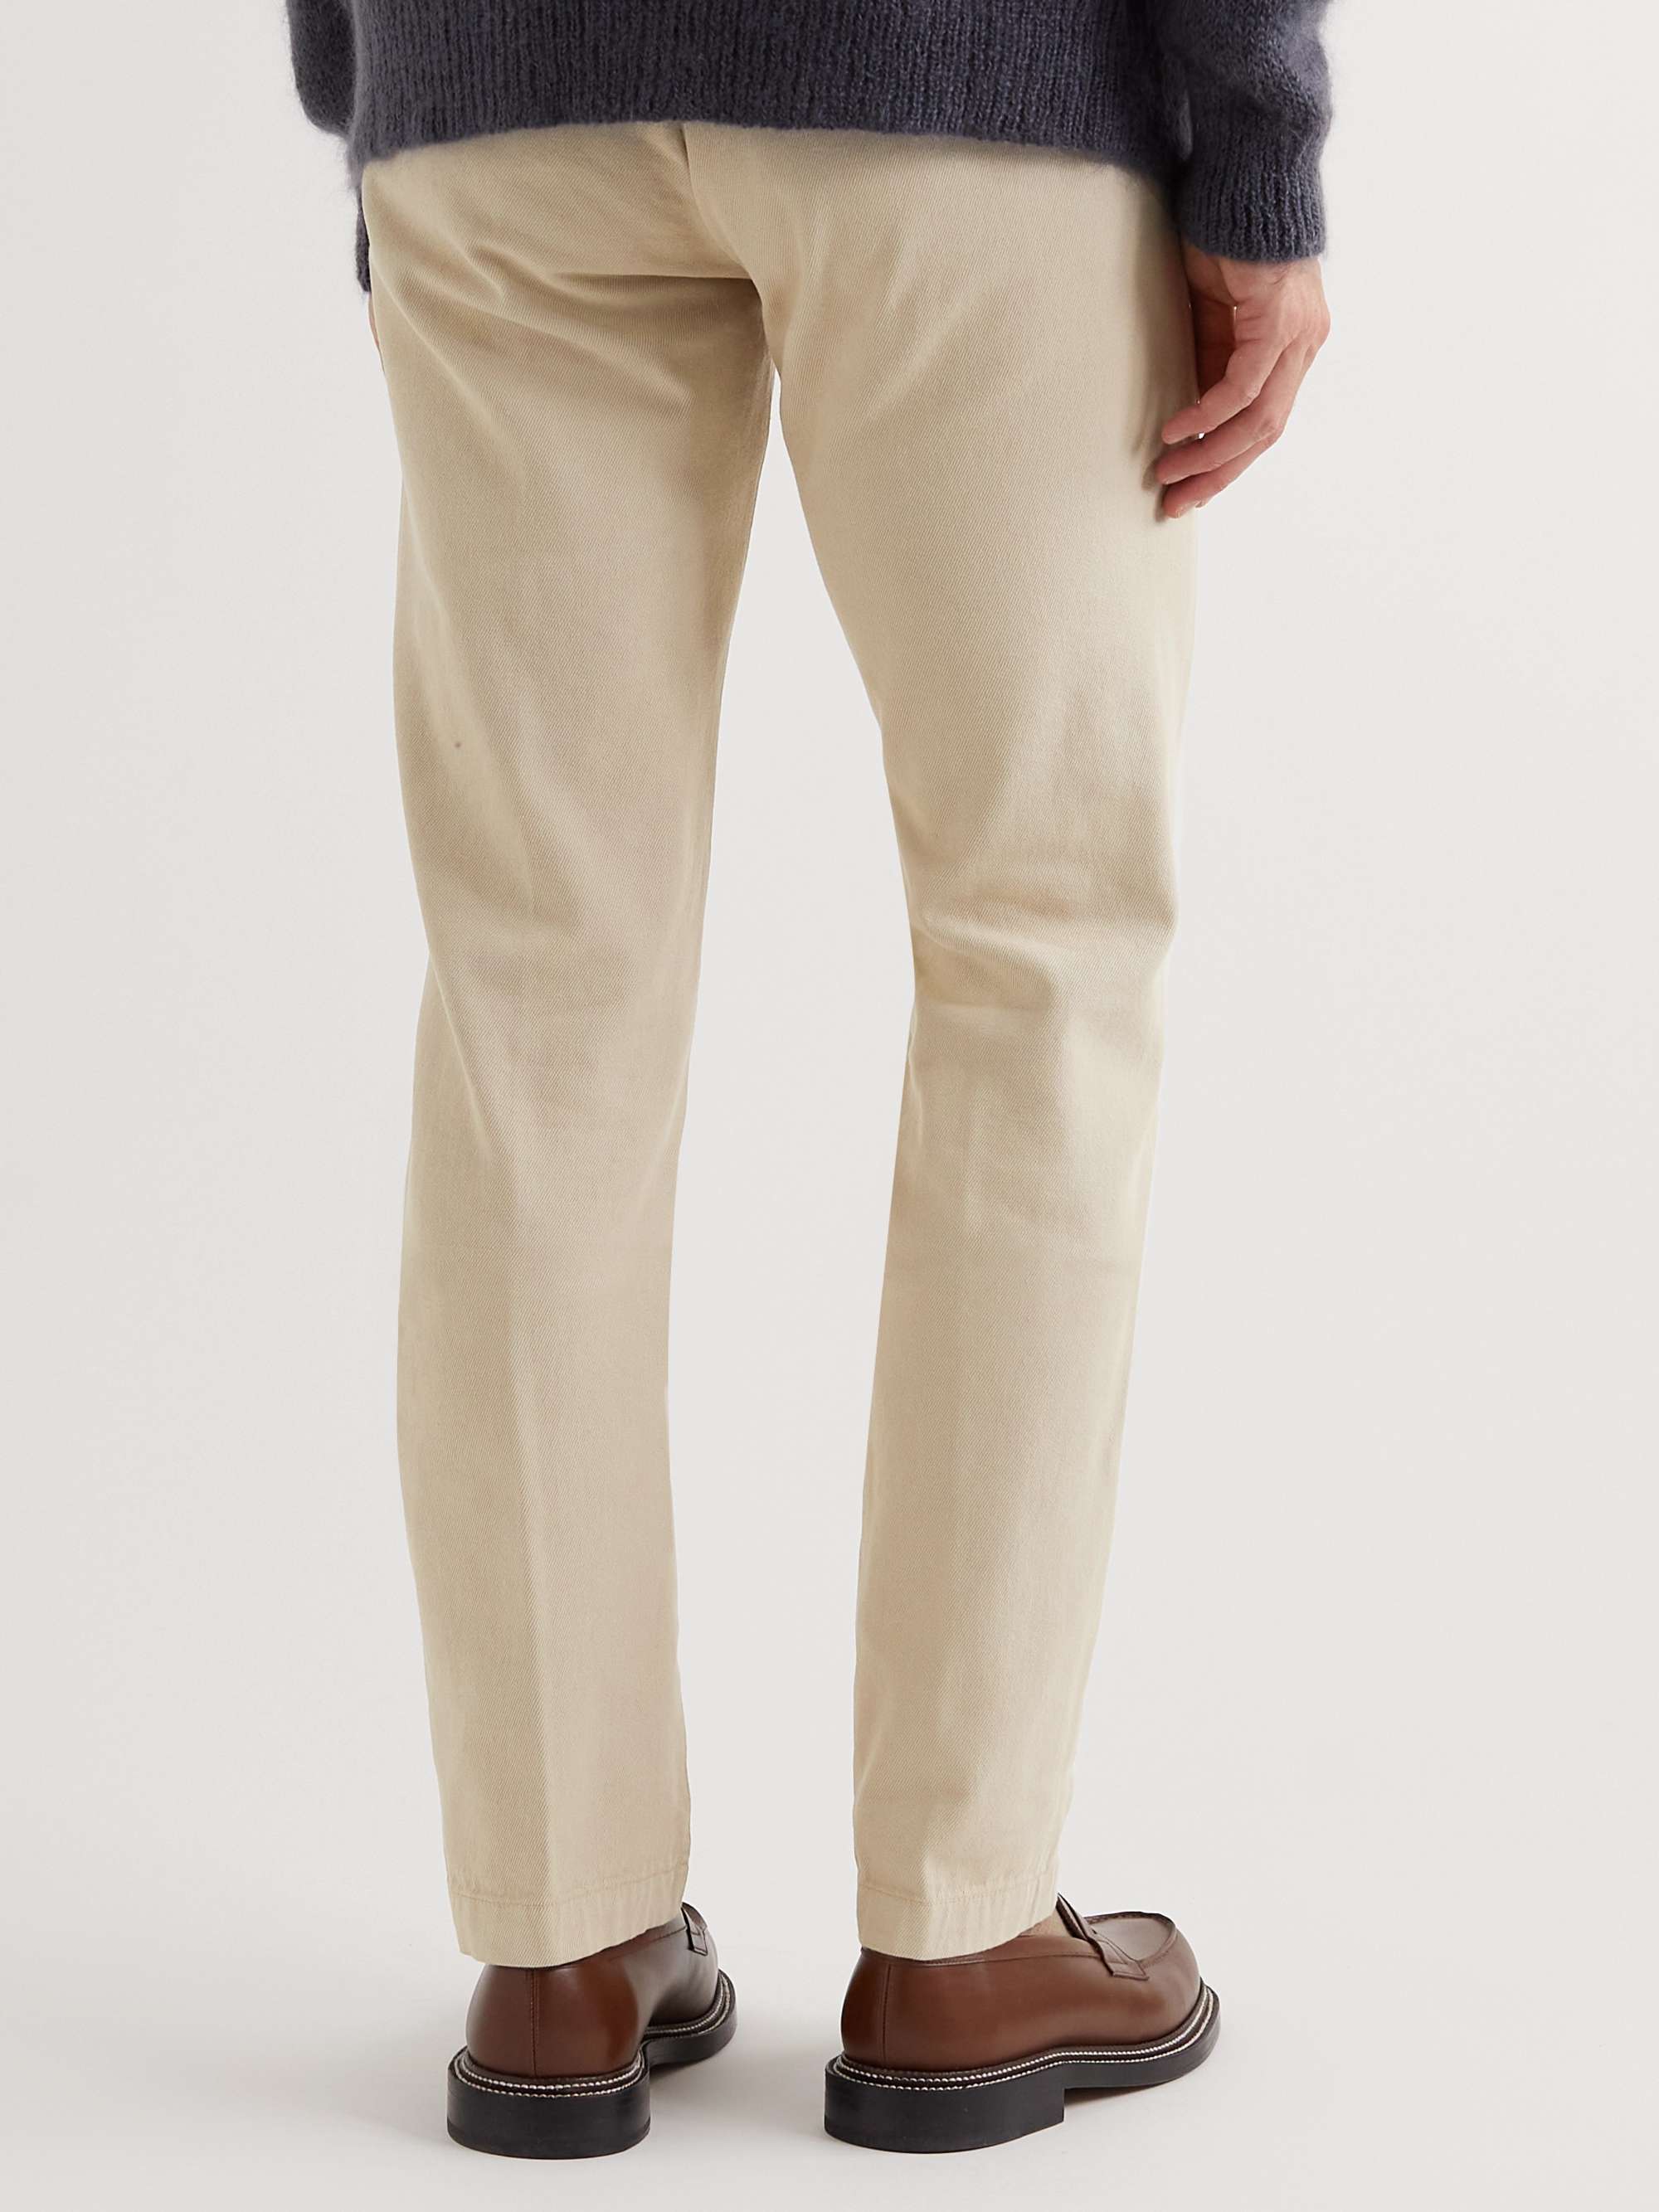 MASSIMO ALBA Slim-Fit Cotton and Wool-Blend Suit Trousers